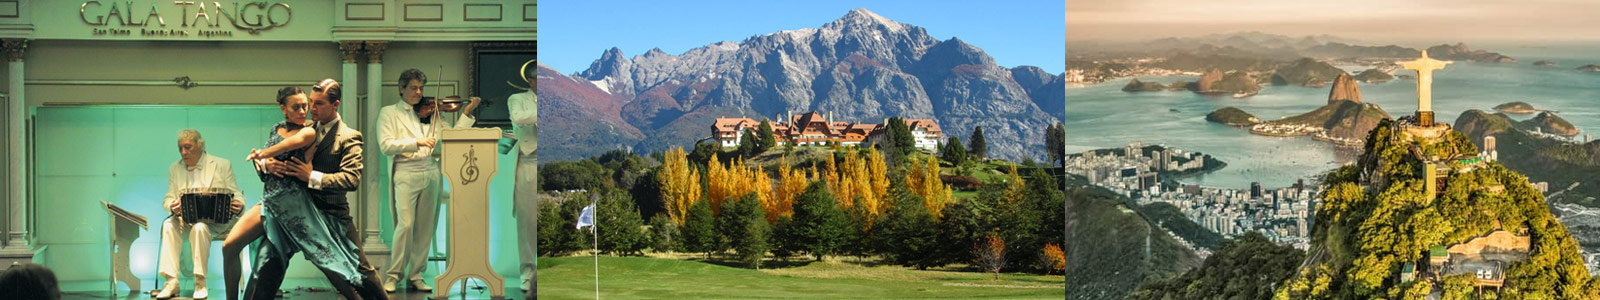 South America Golf Vacation Tours and Golf Cruises